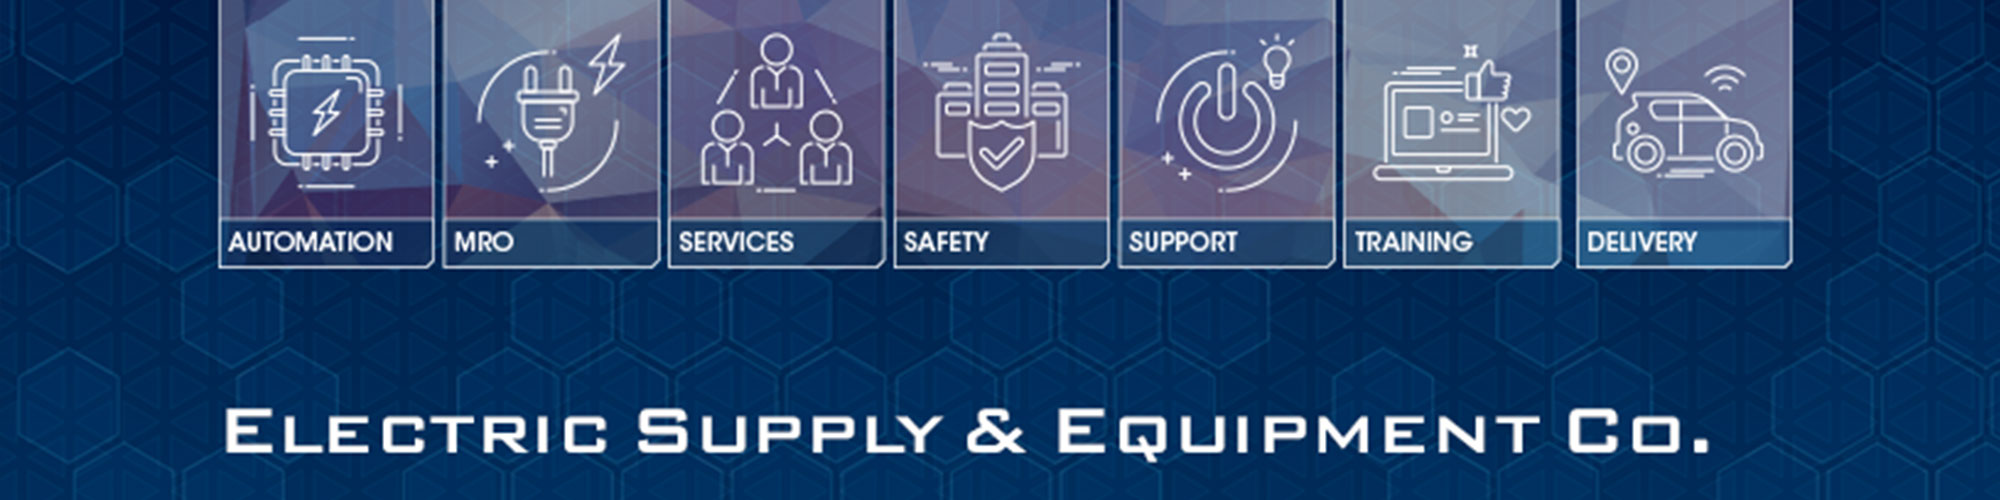 New Account Registration | Electric Supply & Equipment